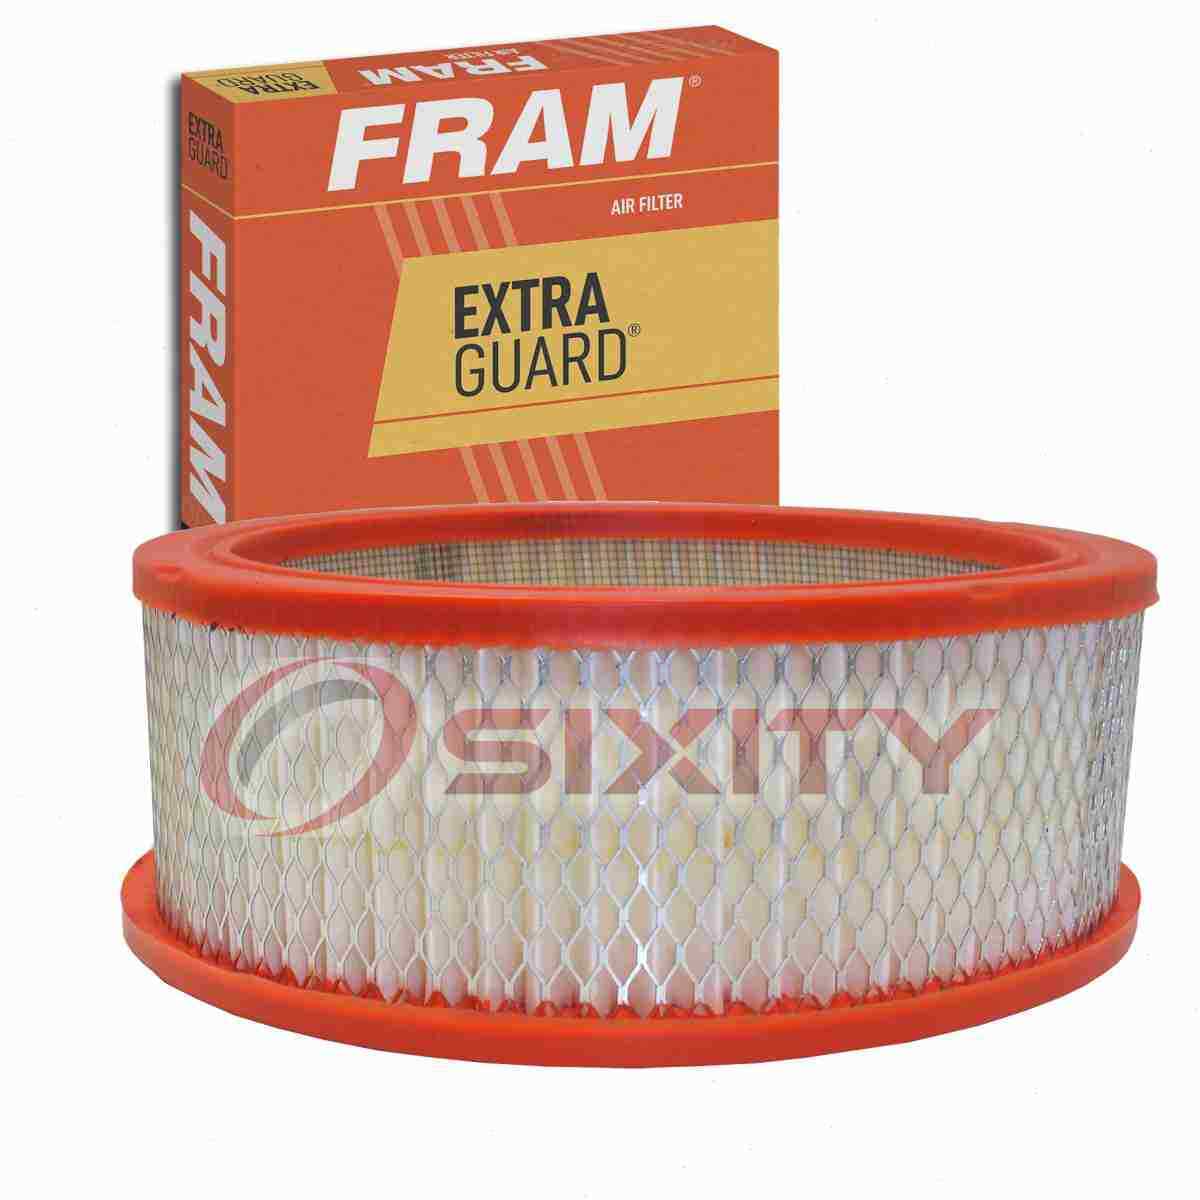 FRAM Extra Guard Air Filter for 1960-1976 Plymouth Valiant Intake Inlet qt